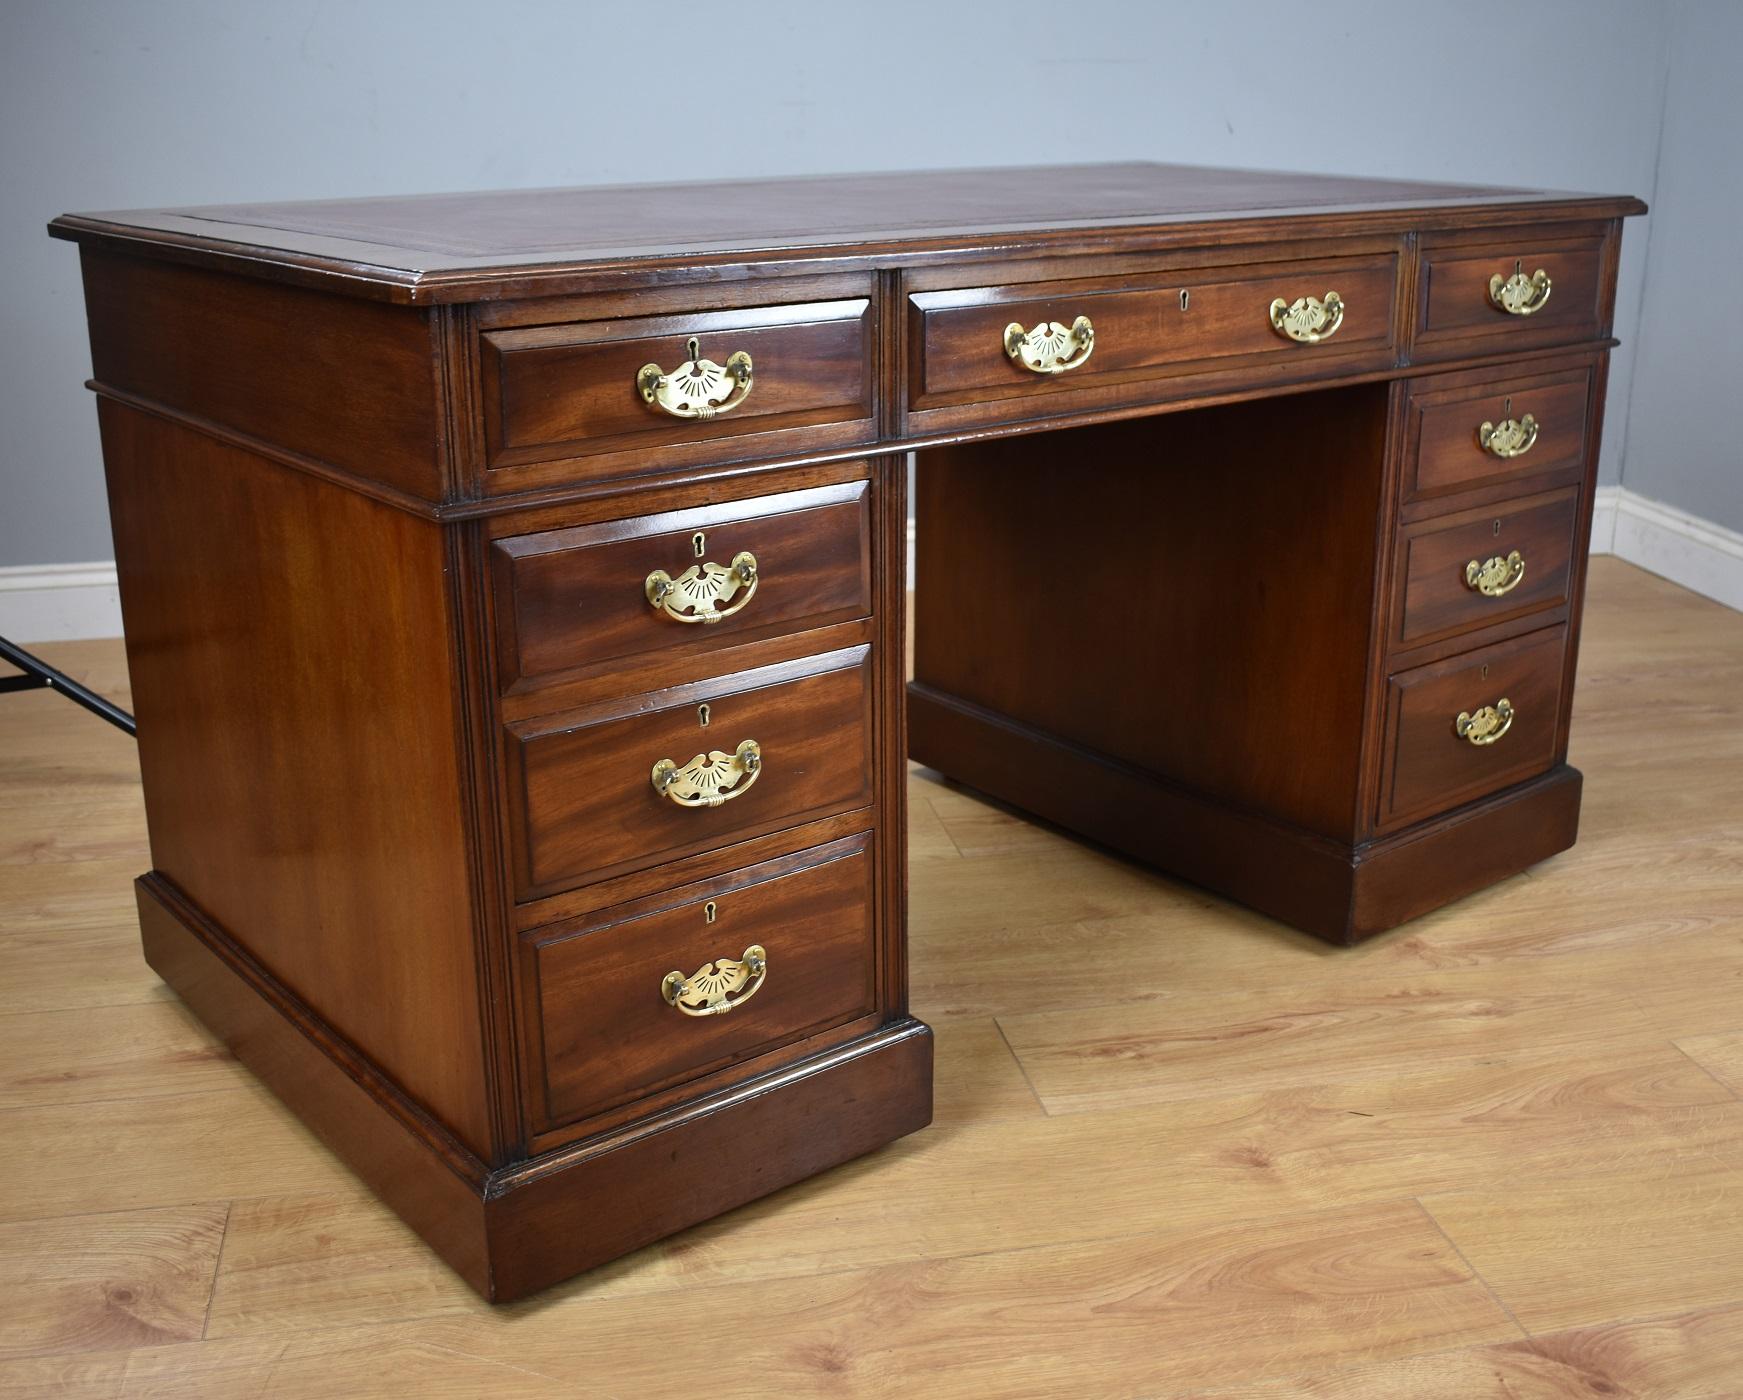 For sale is a good quality Edwardian red walnut pedestal desk. The top of the desk has a maroon leather insert with decorative tooling, above three drawers. The top fits onto two pedestals, each with a further three graduated drawers each with